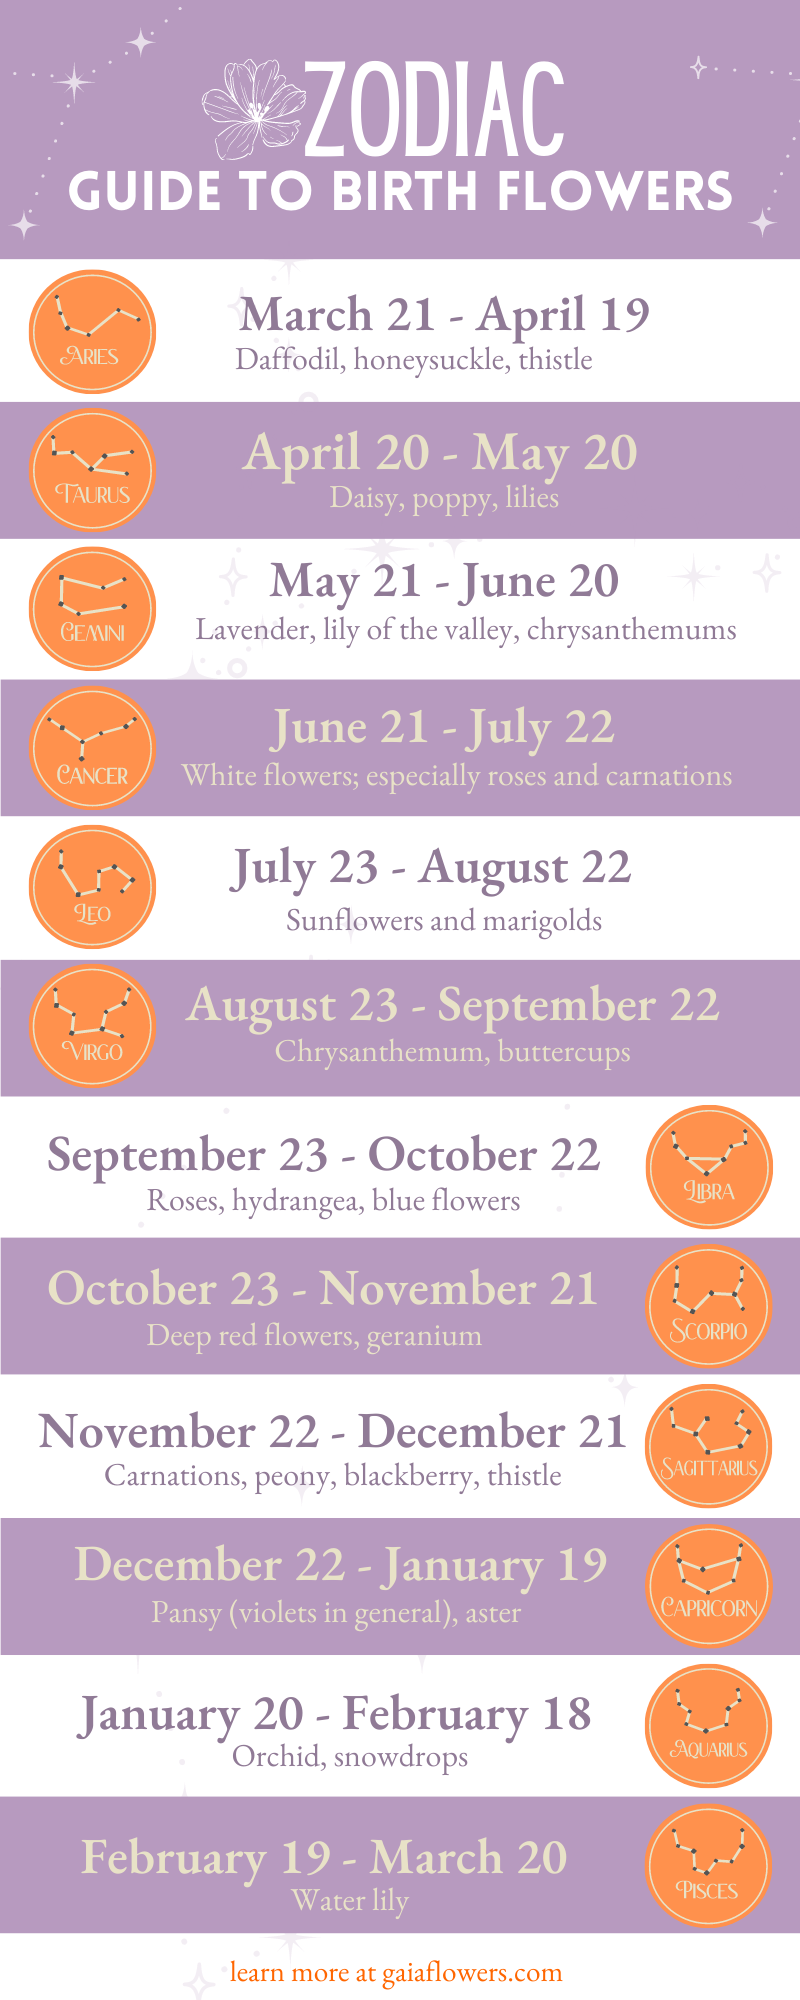 Infographic of the zodiac guide to birth flowers.